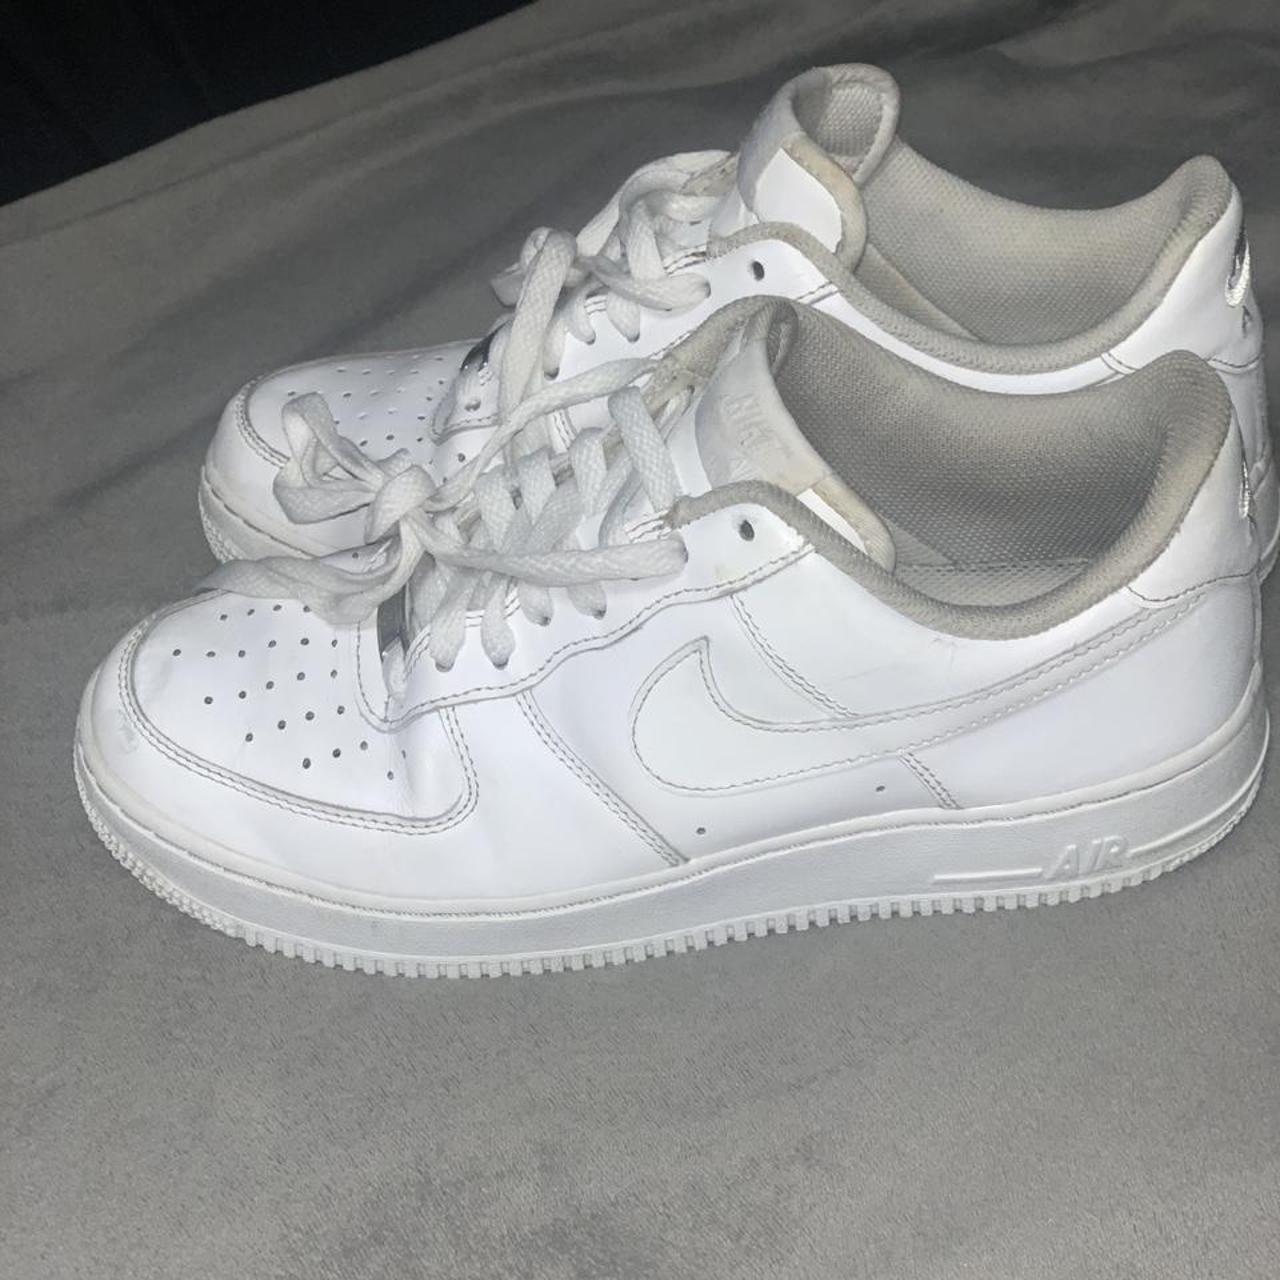 Used all white mens Air Force ones. These kicks have... - Depop